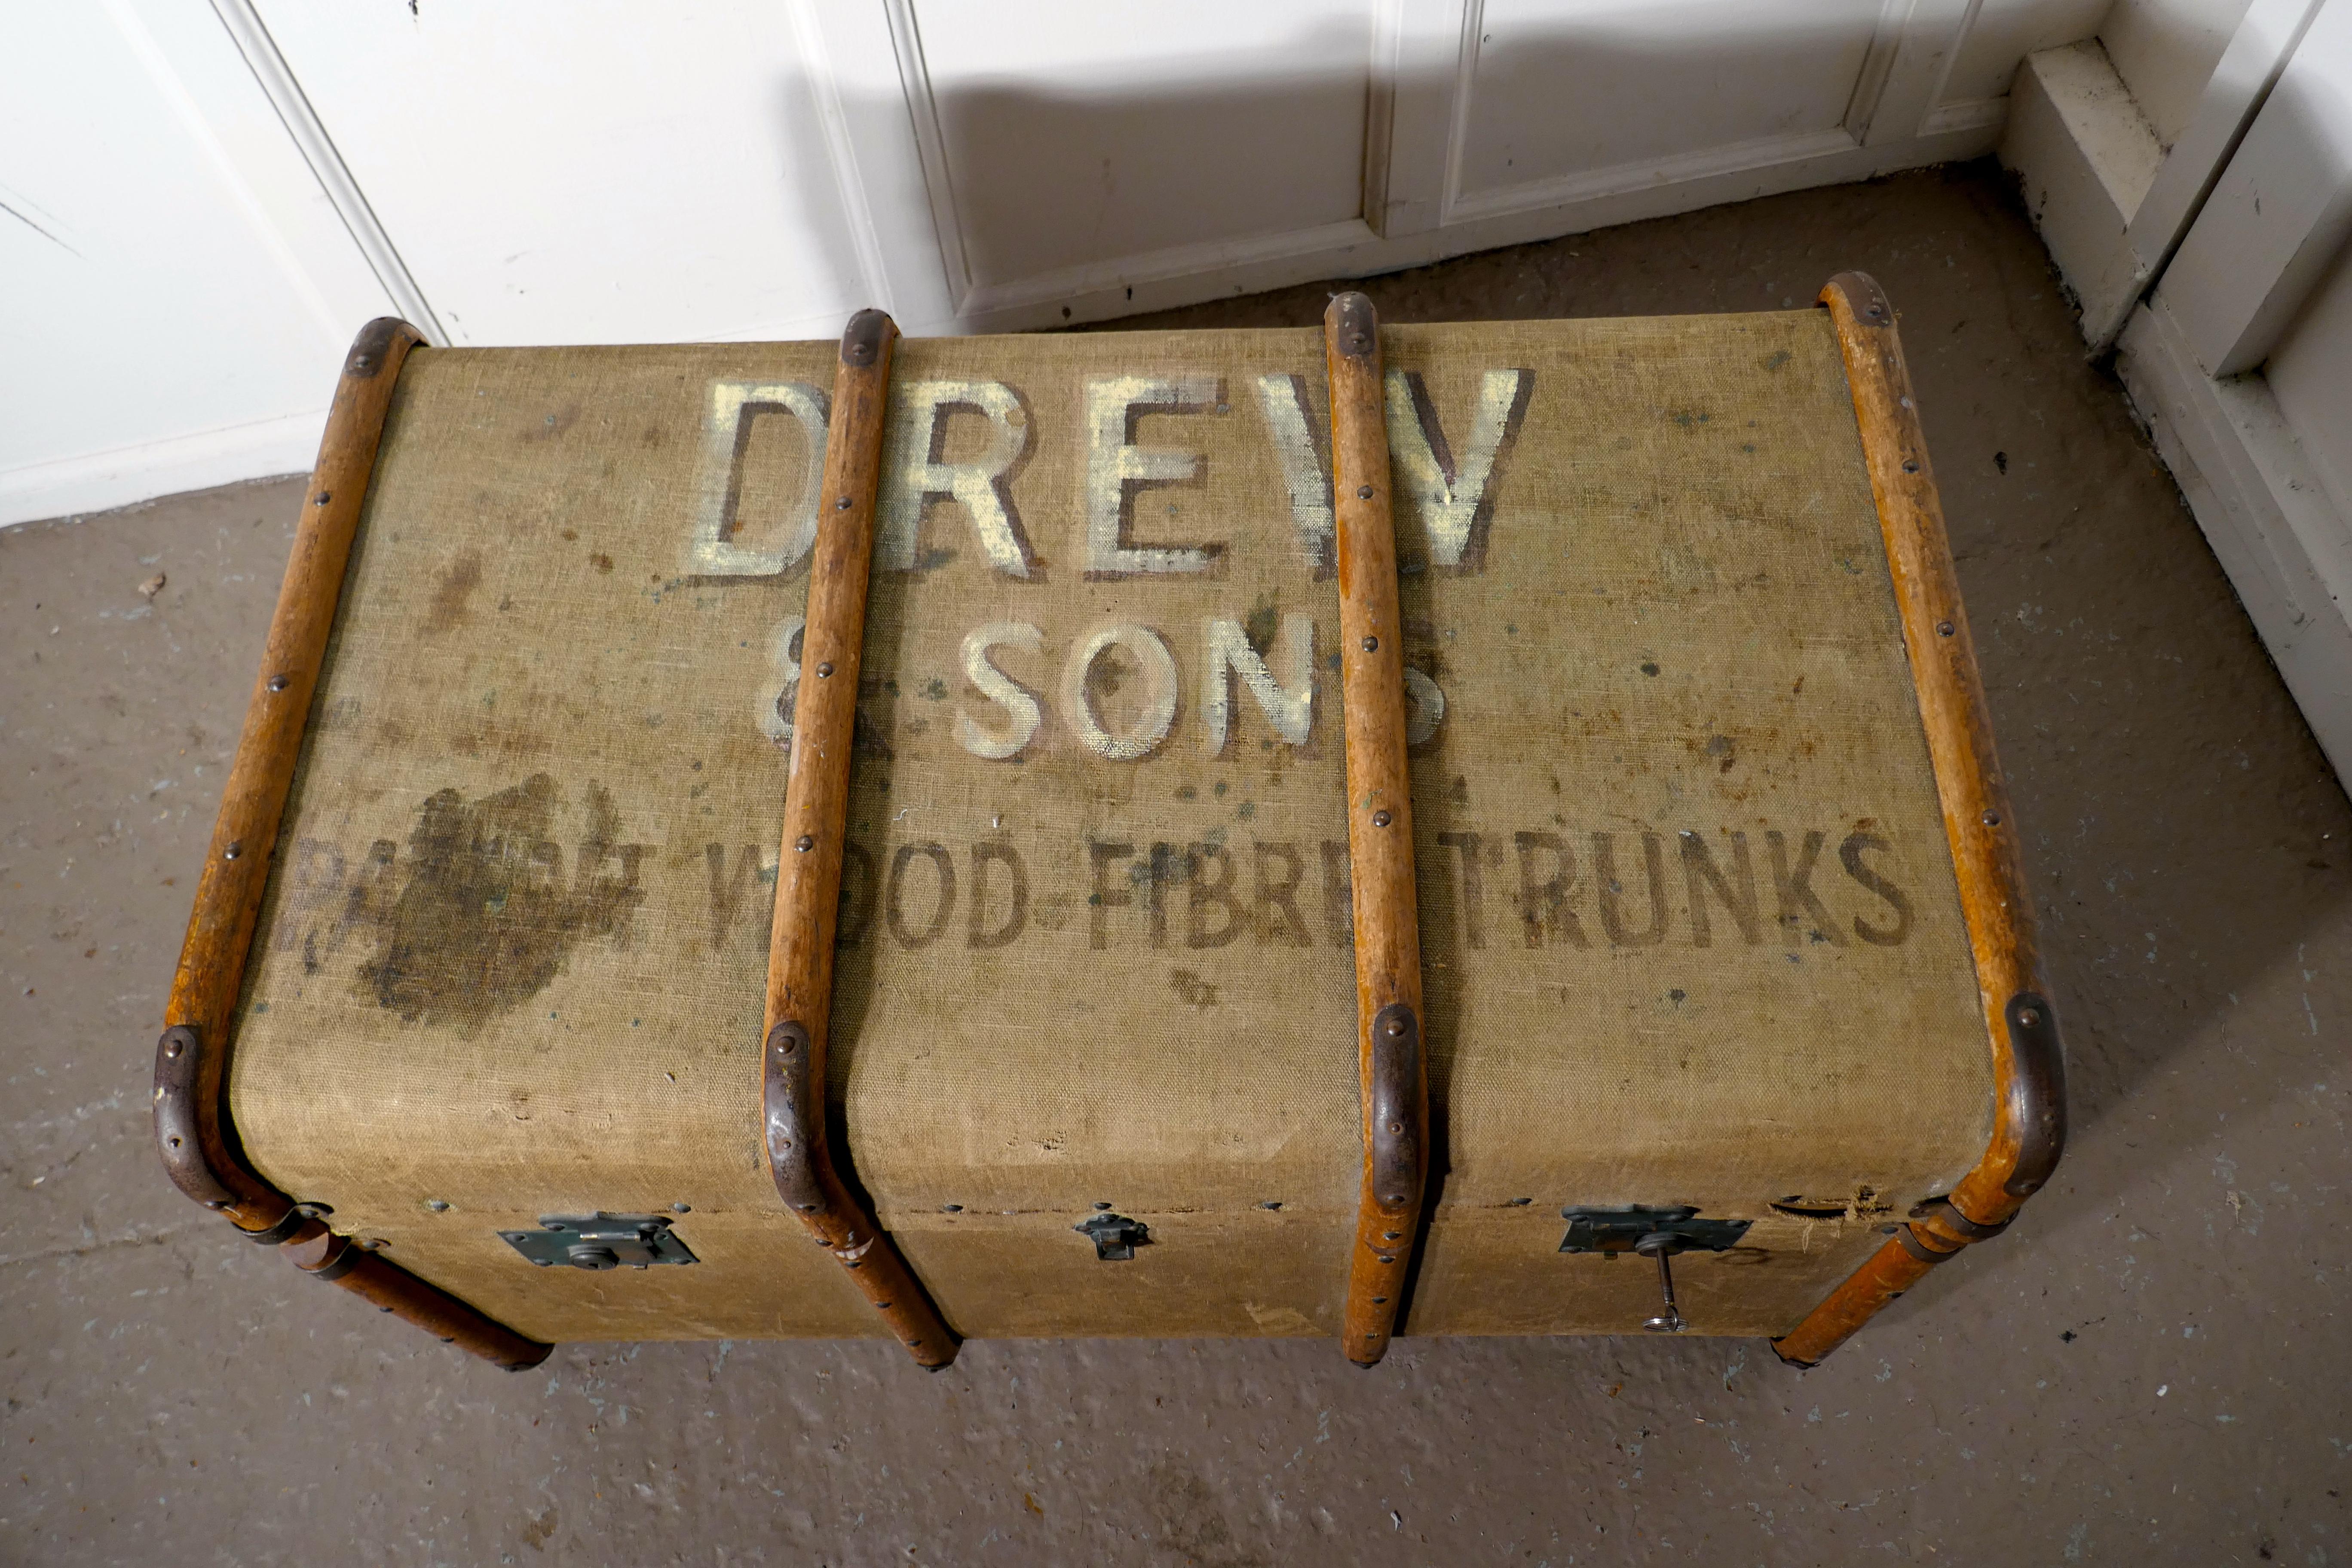 A large vintage Drew & Sons canvas steamer trunk

A very useful decorative suitcase or travel trunk, it is lined in a lightly striped fabric with a removable tray to the interior
The trunk is brass and wood bound, the locks are working and we